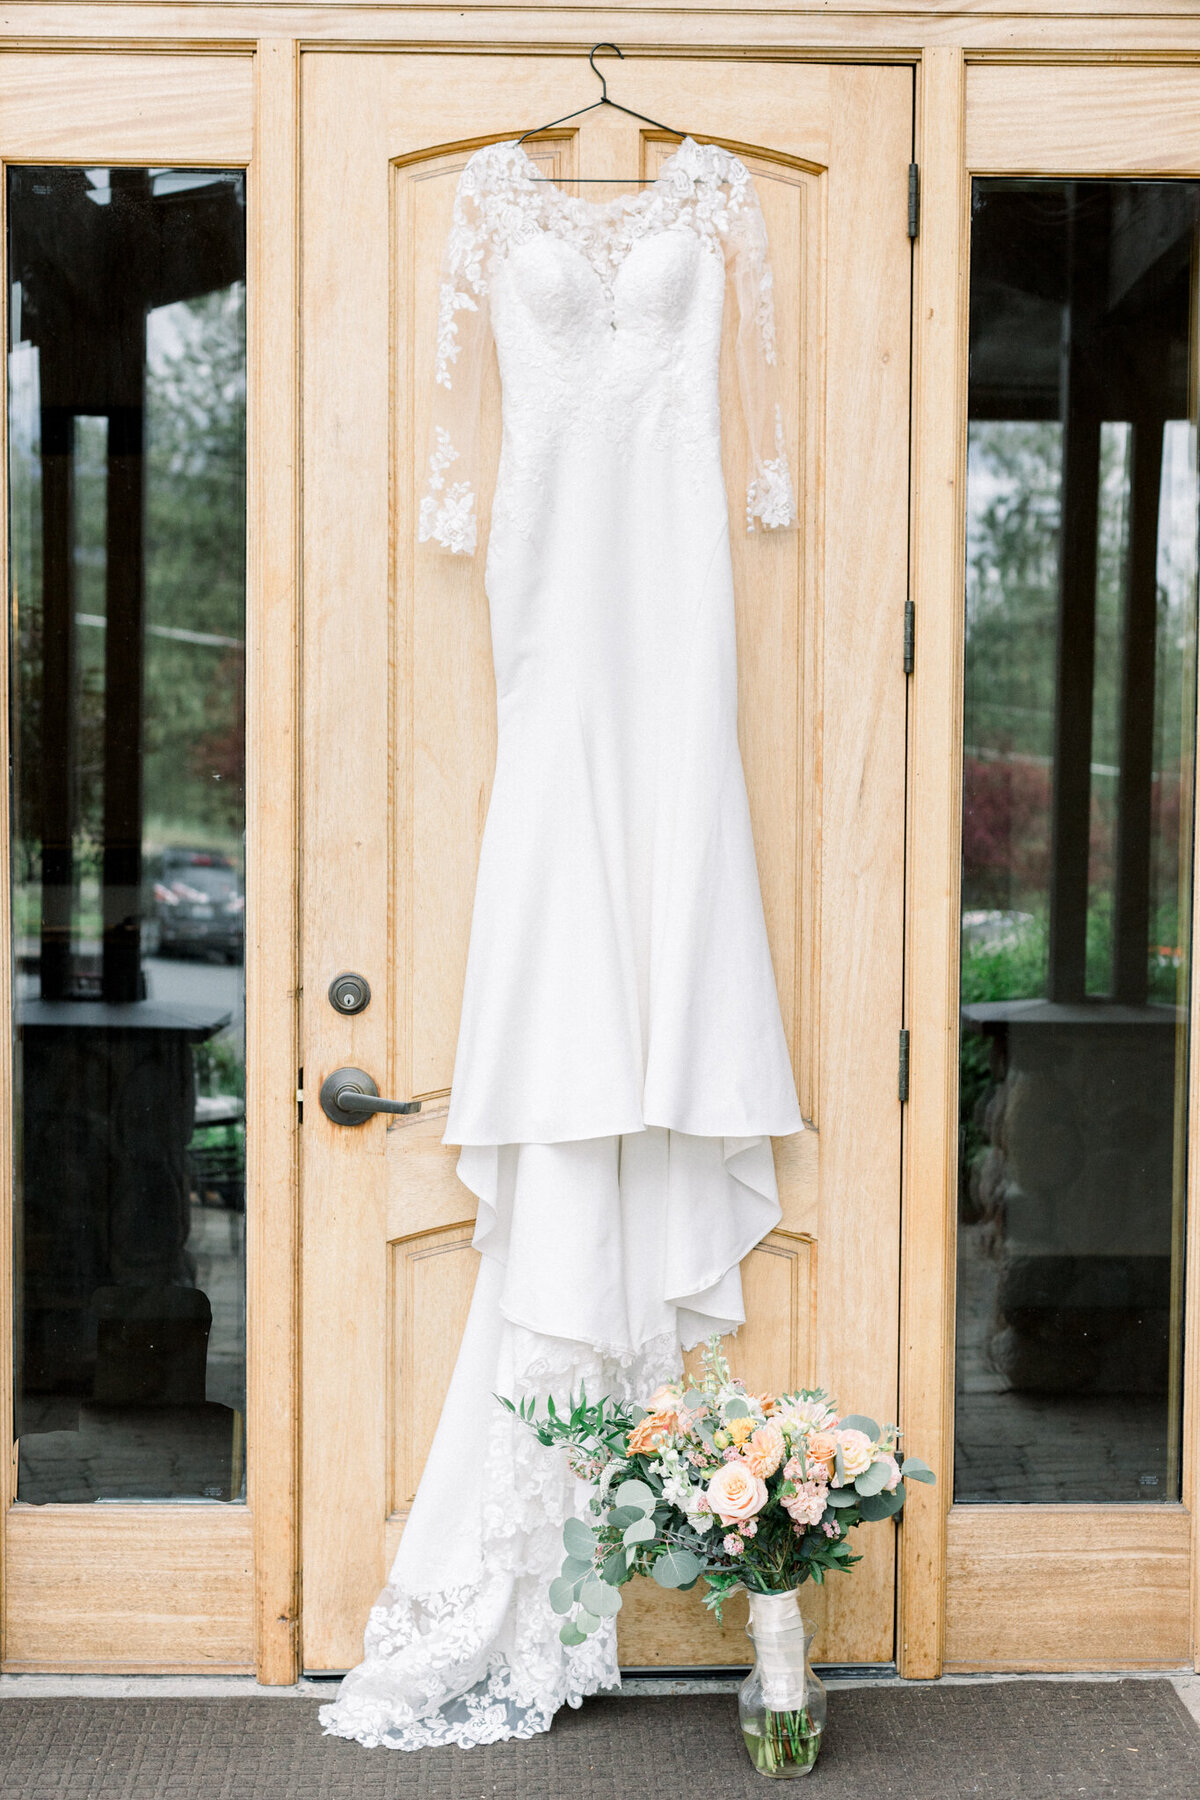 Brides dress hanging on a door with flowers and shoes taken by spokane wedding Photographer